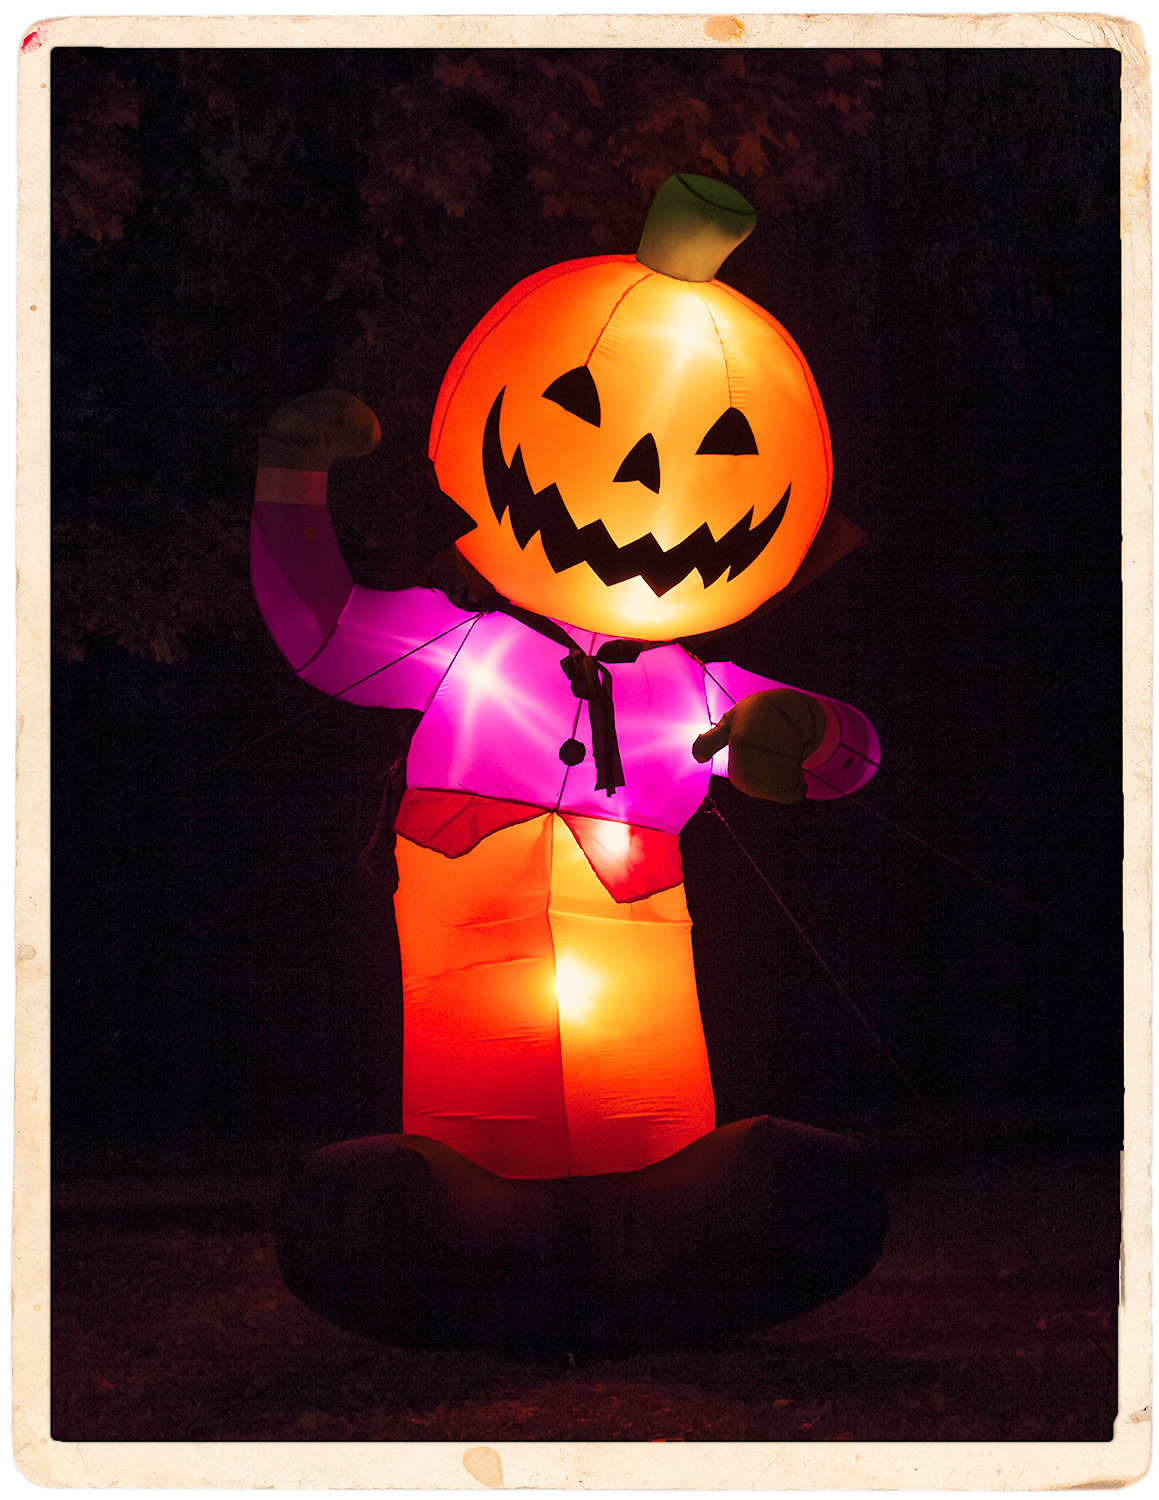 An inflatable jack-o'-lantern man and Halloween display in a yard photographed at night.